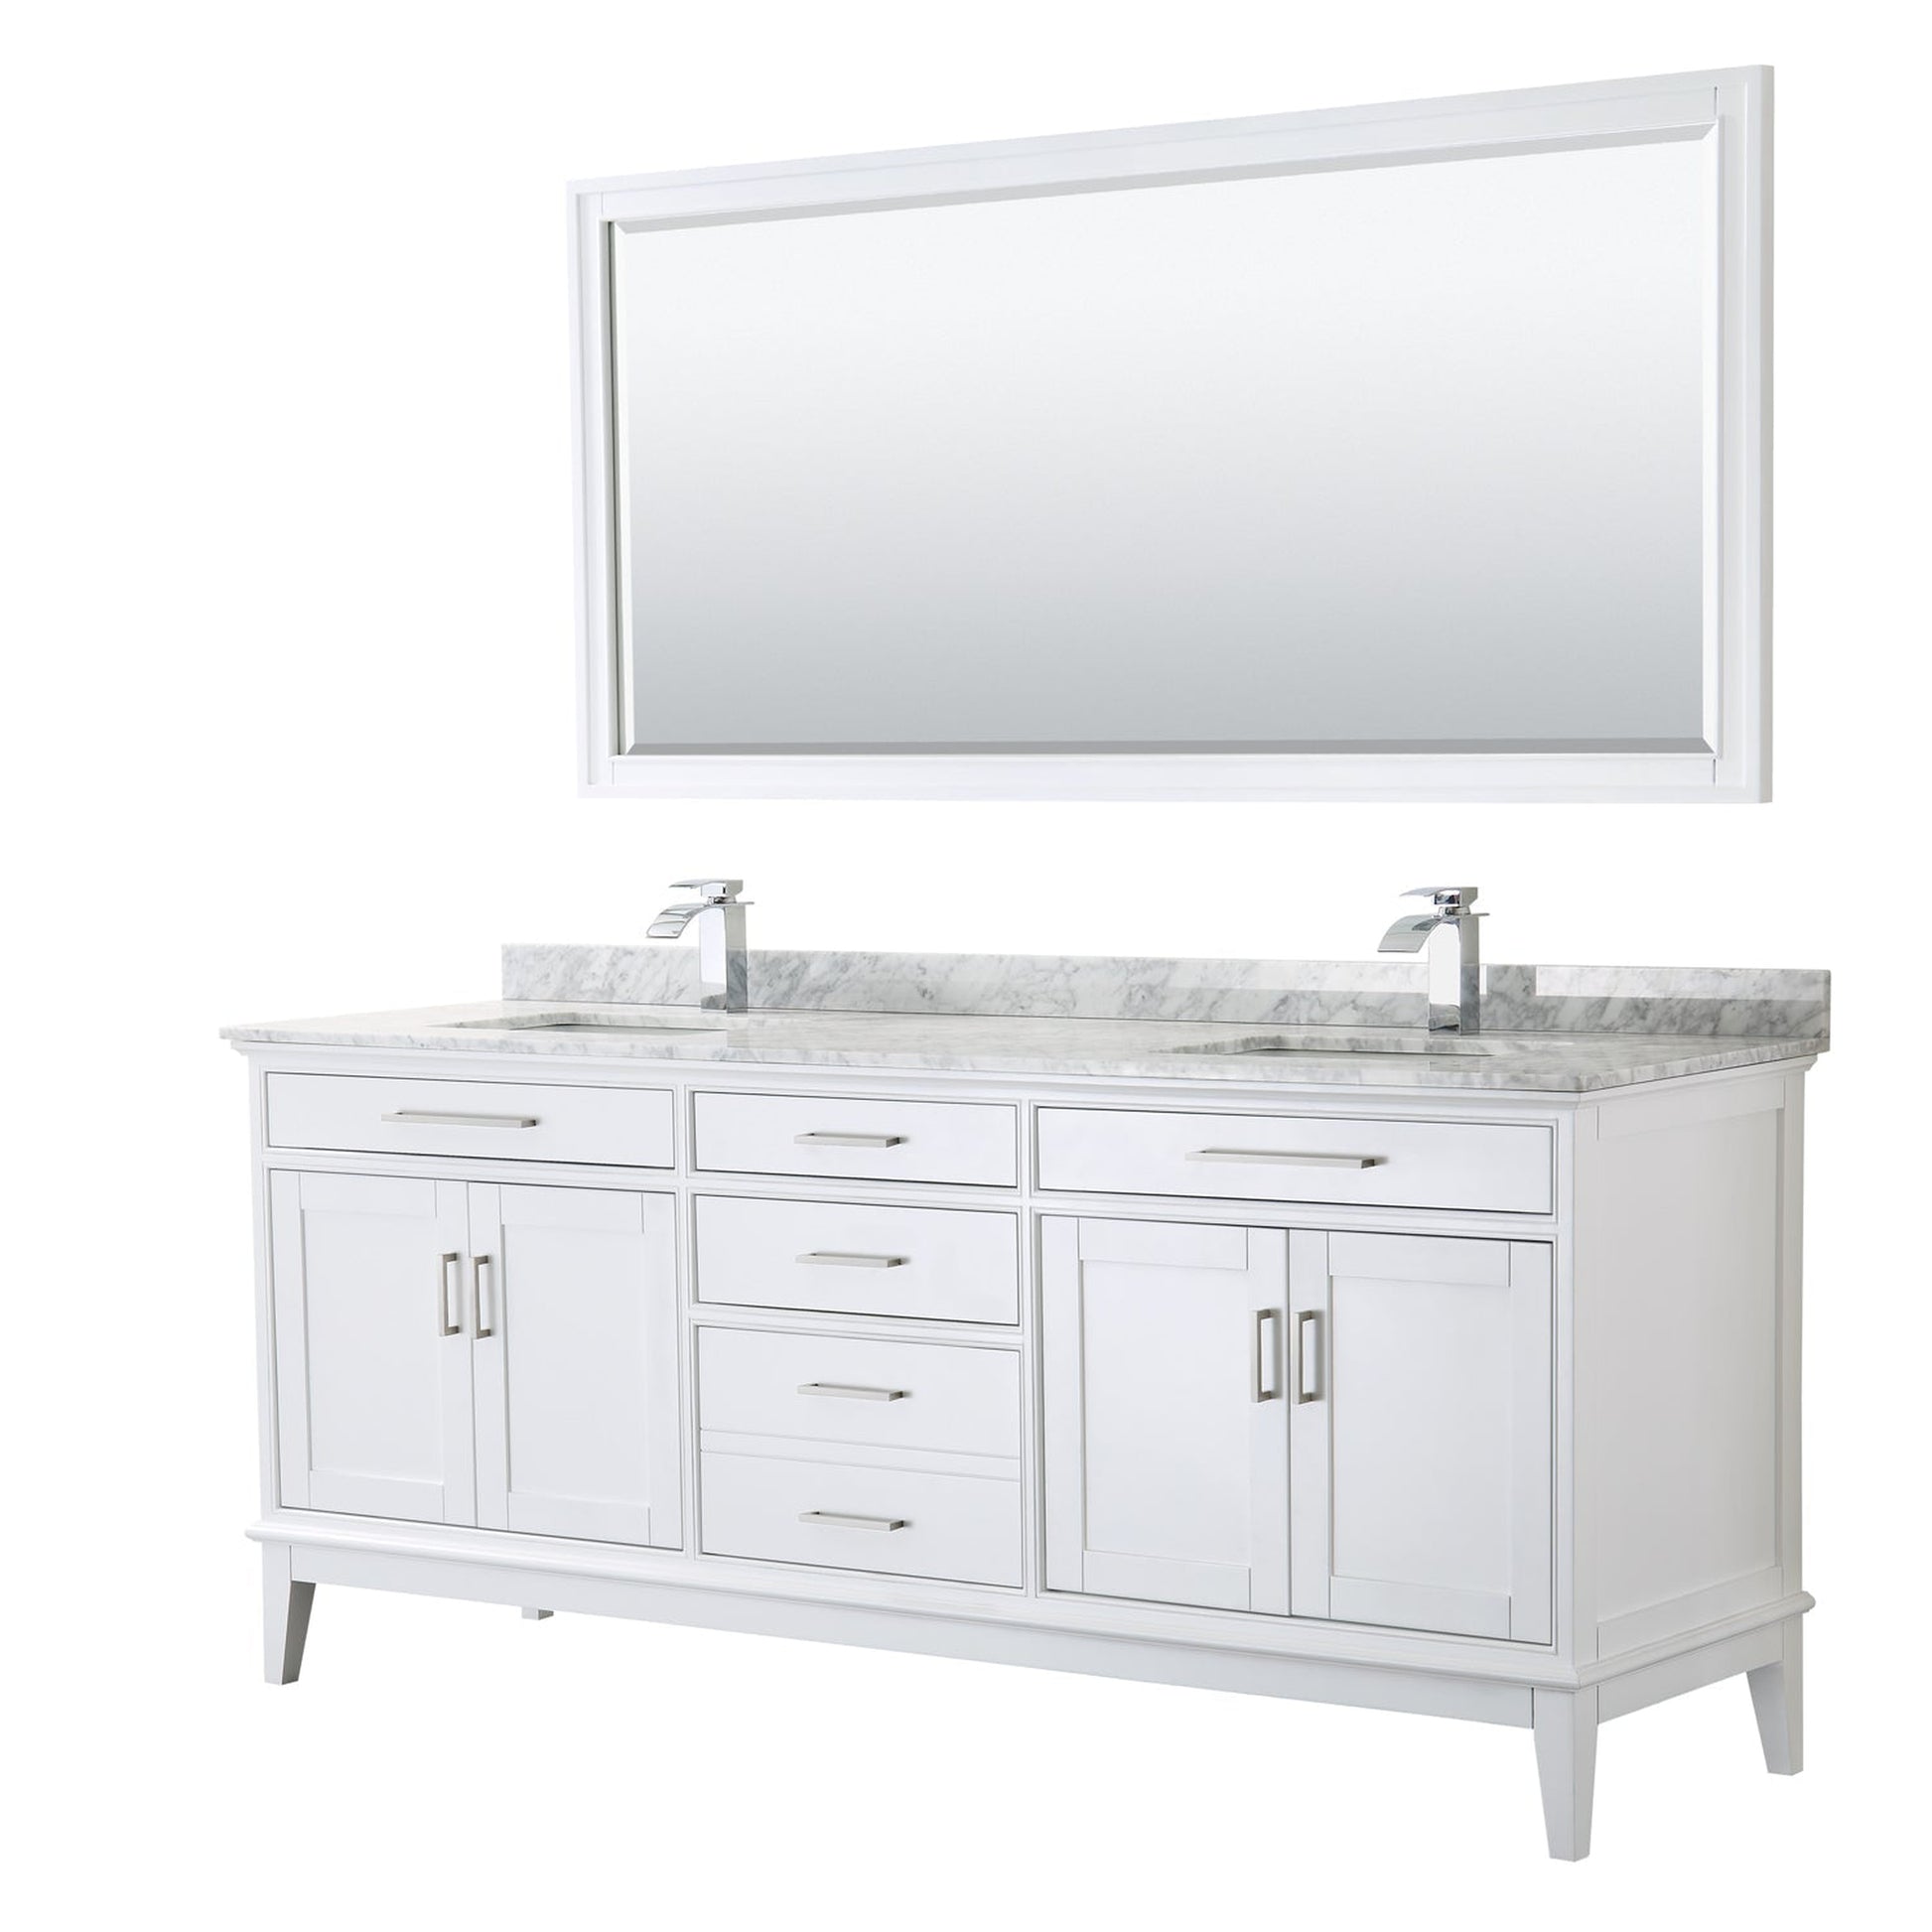 Wyndham Collection Margate 80" Double Bathroom White Vanity With White Carrara Marble Countertop, Undermount Square Sink And 70" Mirror